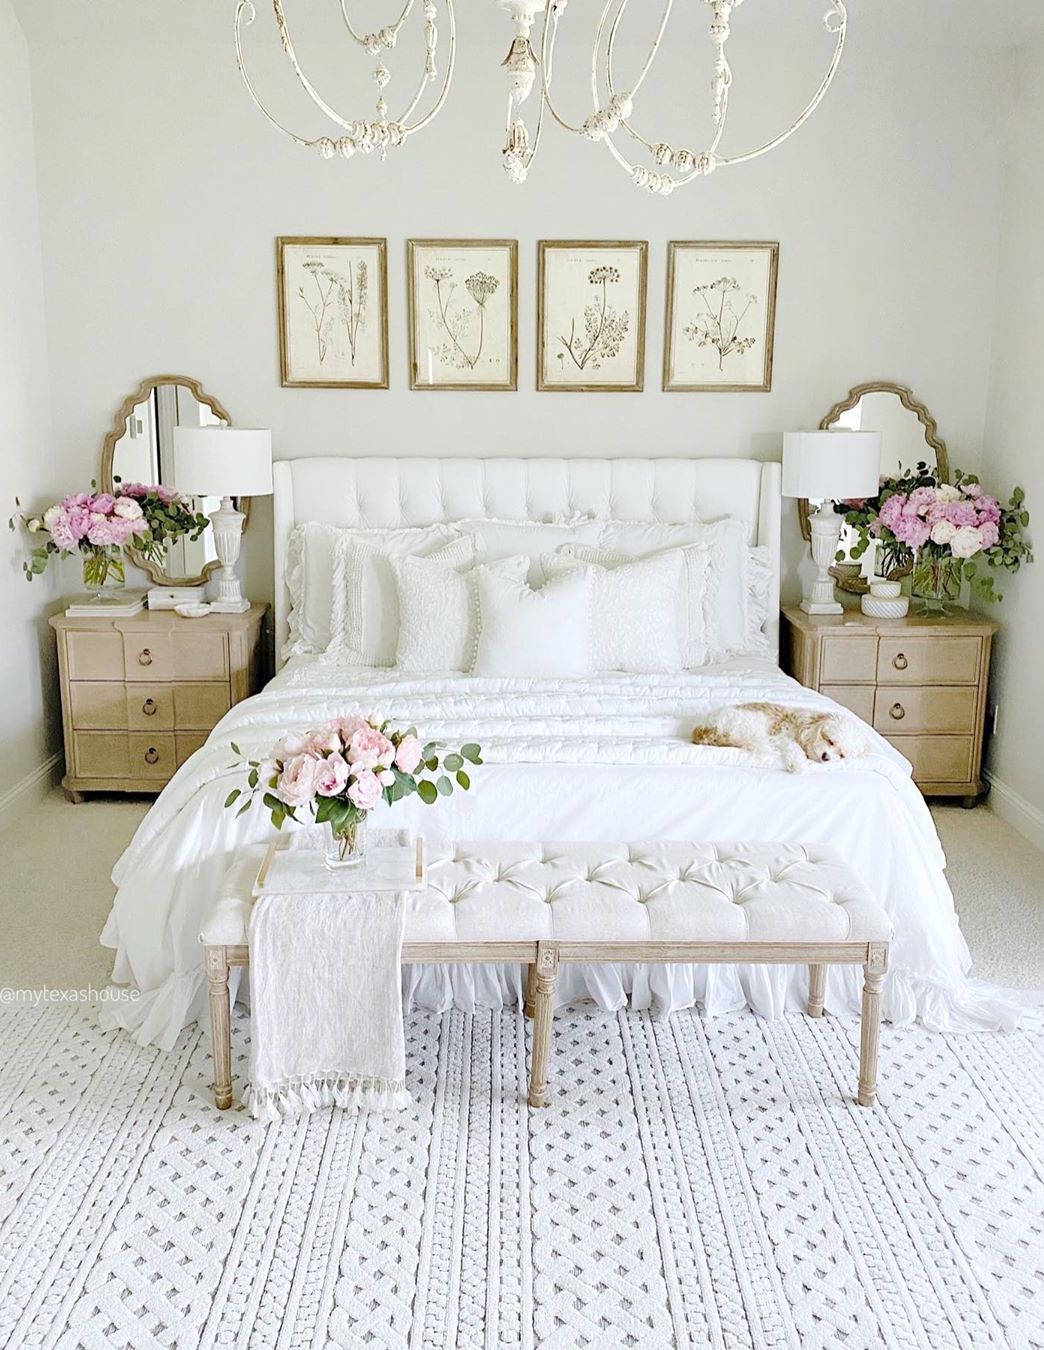 20 Feminine Bedrooms with Style